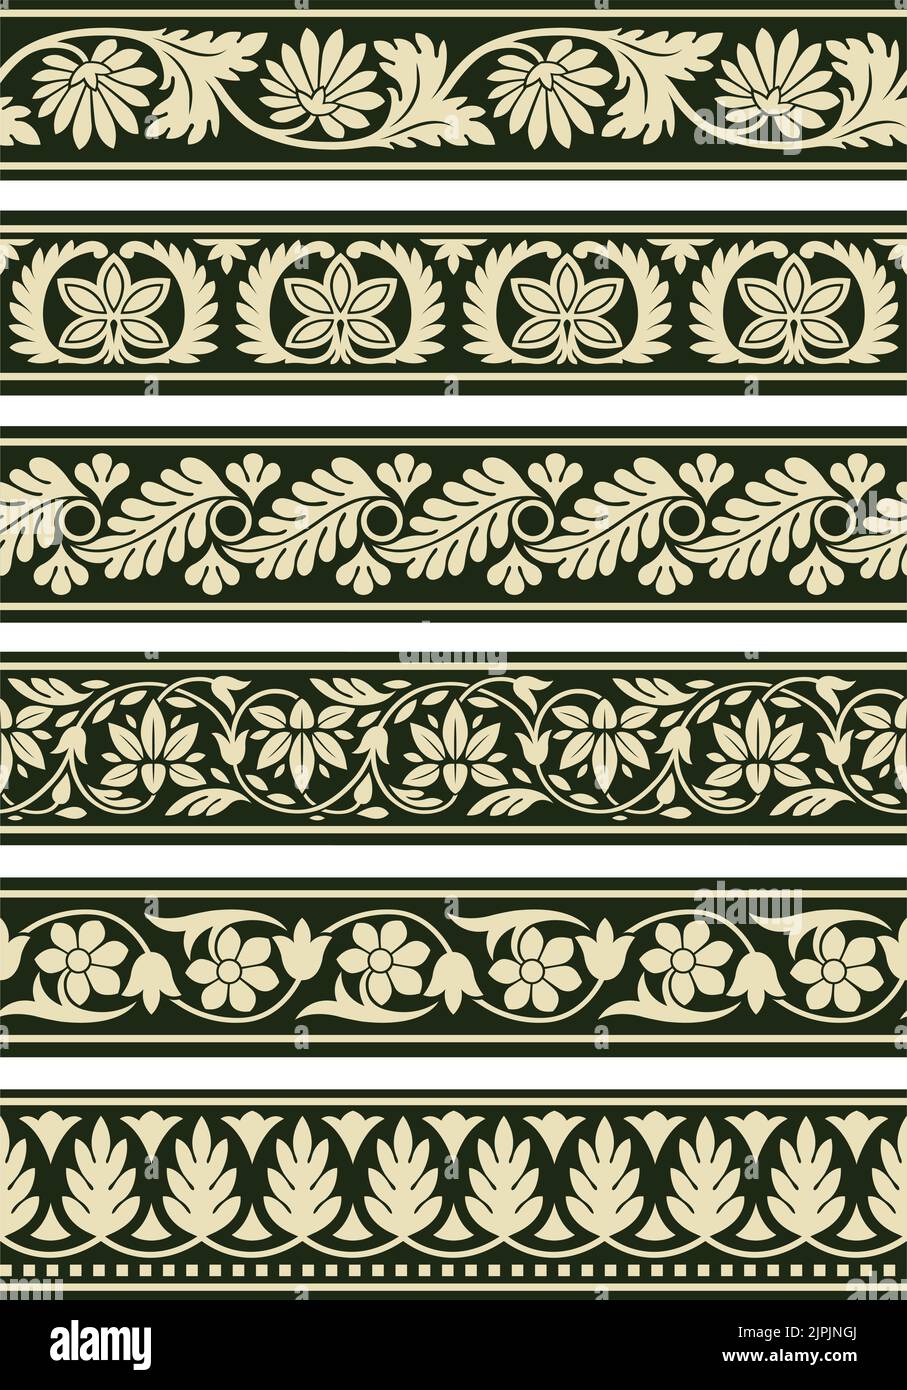 A set of vintage vector decorative east Indian style decorative floral borders. Stock Vector